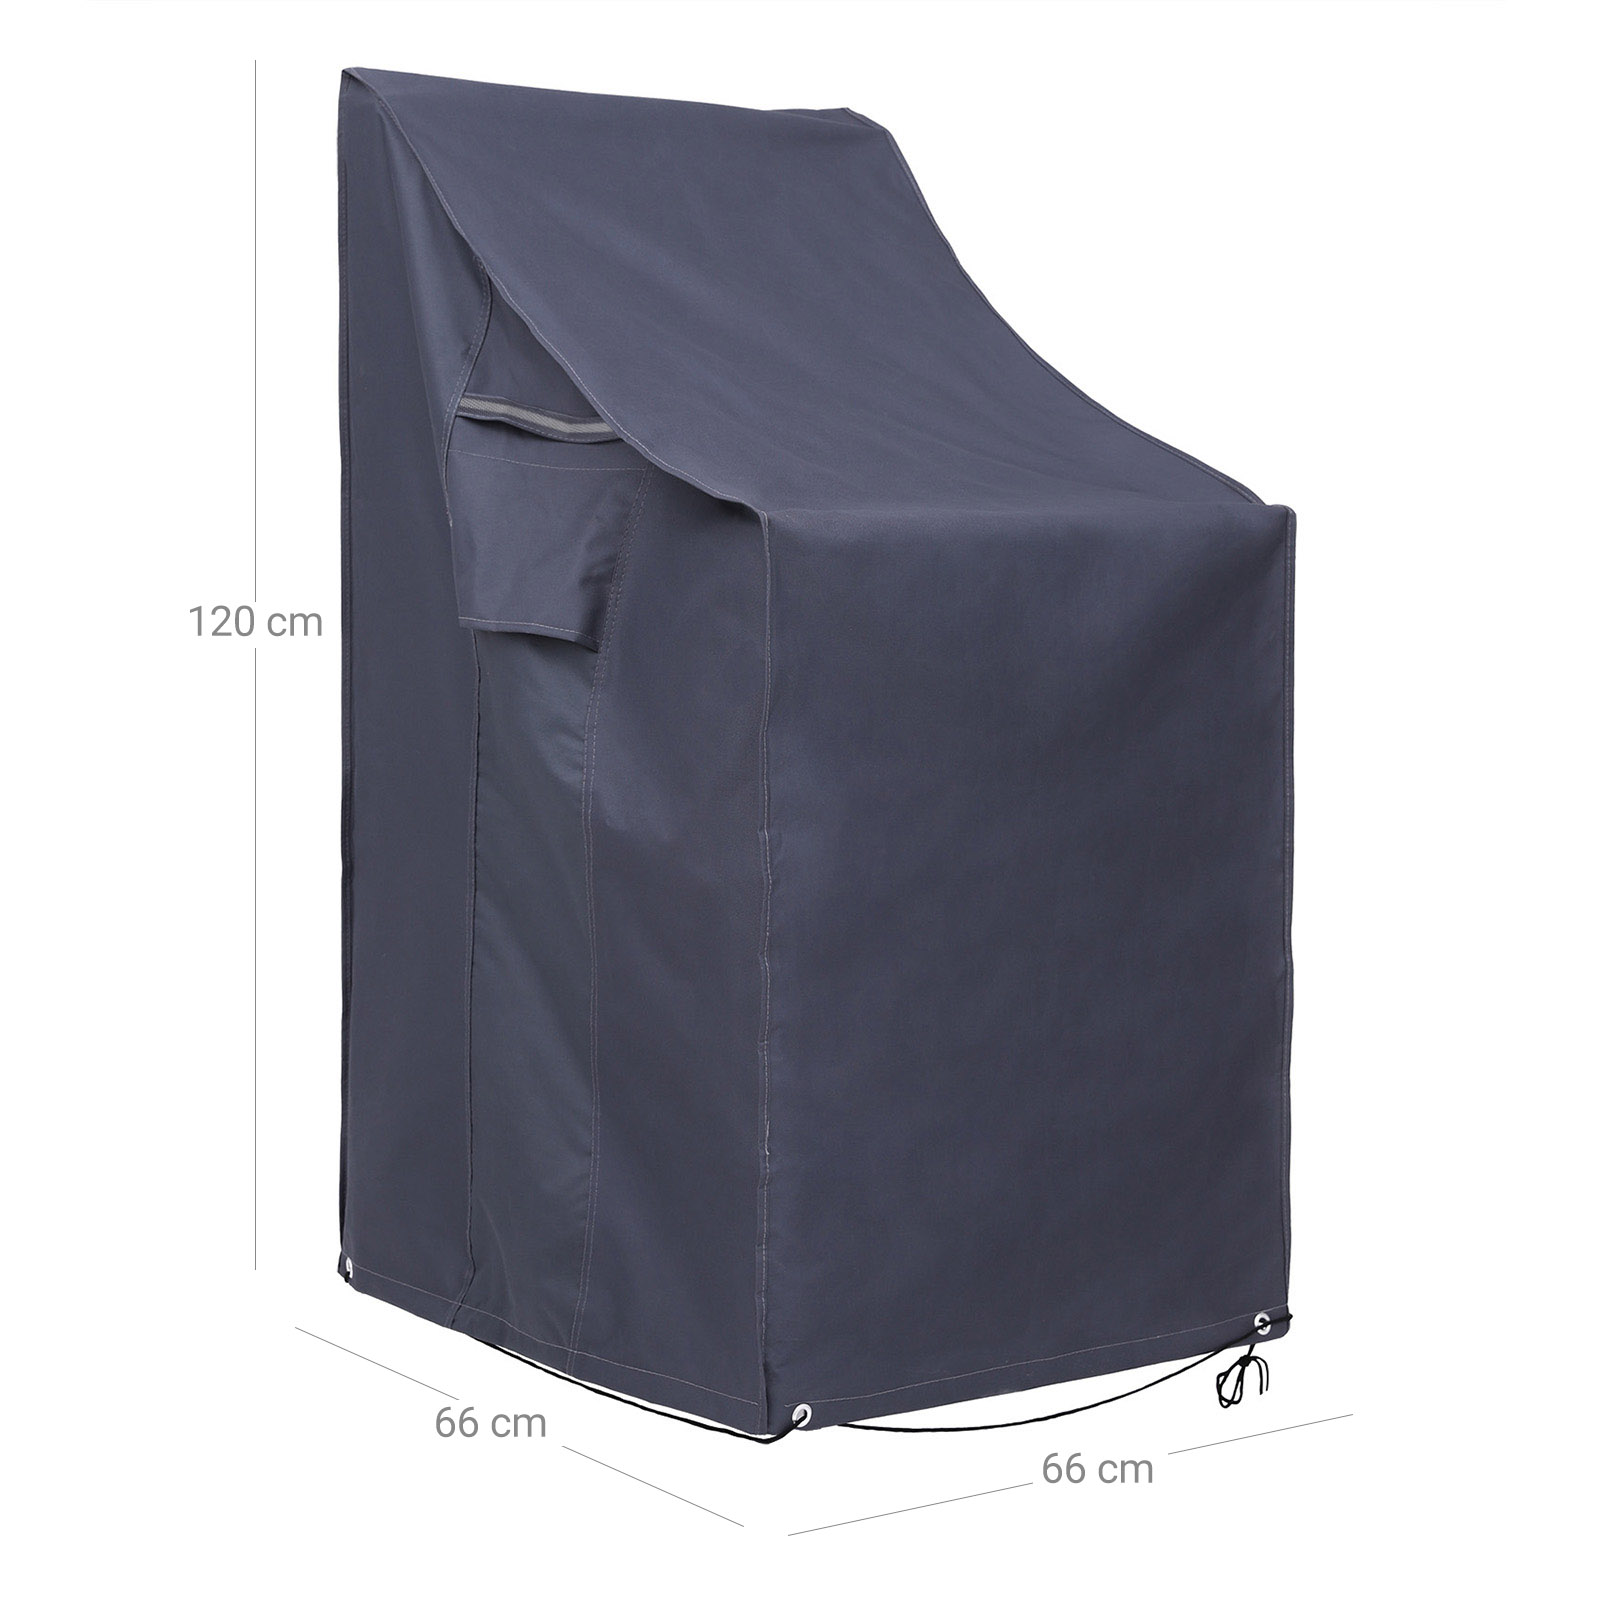 SONGMICS Stacking Patio Chair Cover, 600D Oxford Fabric Waterproof